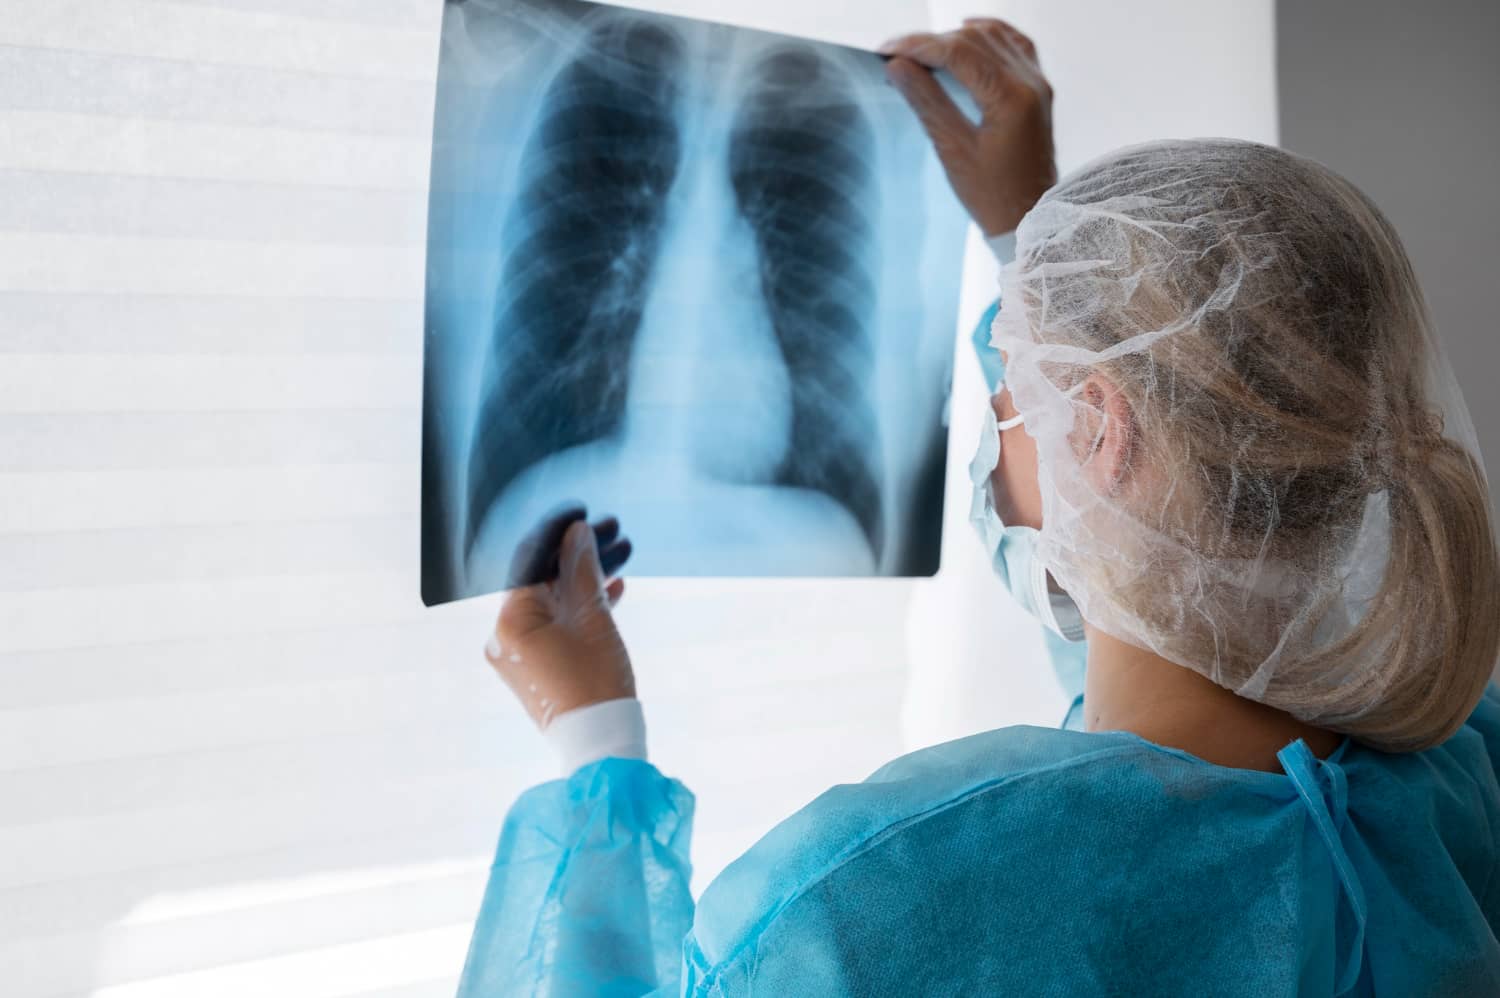 Young Women Become the Main Victims of Lung Cancer: Study